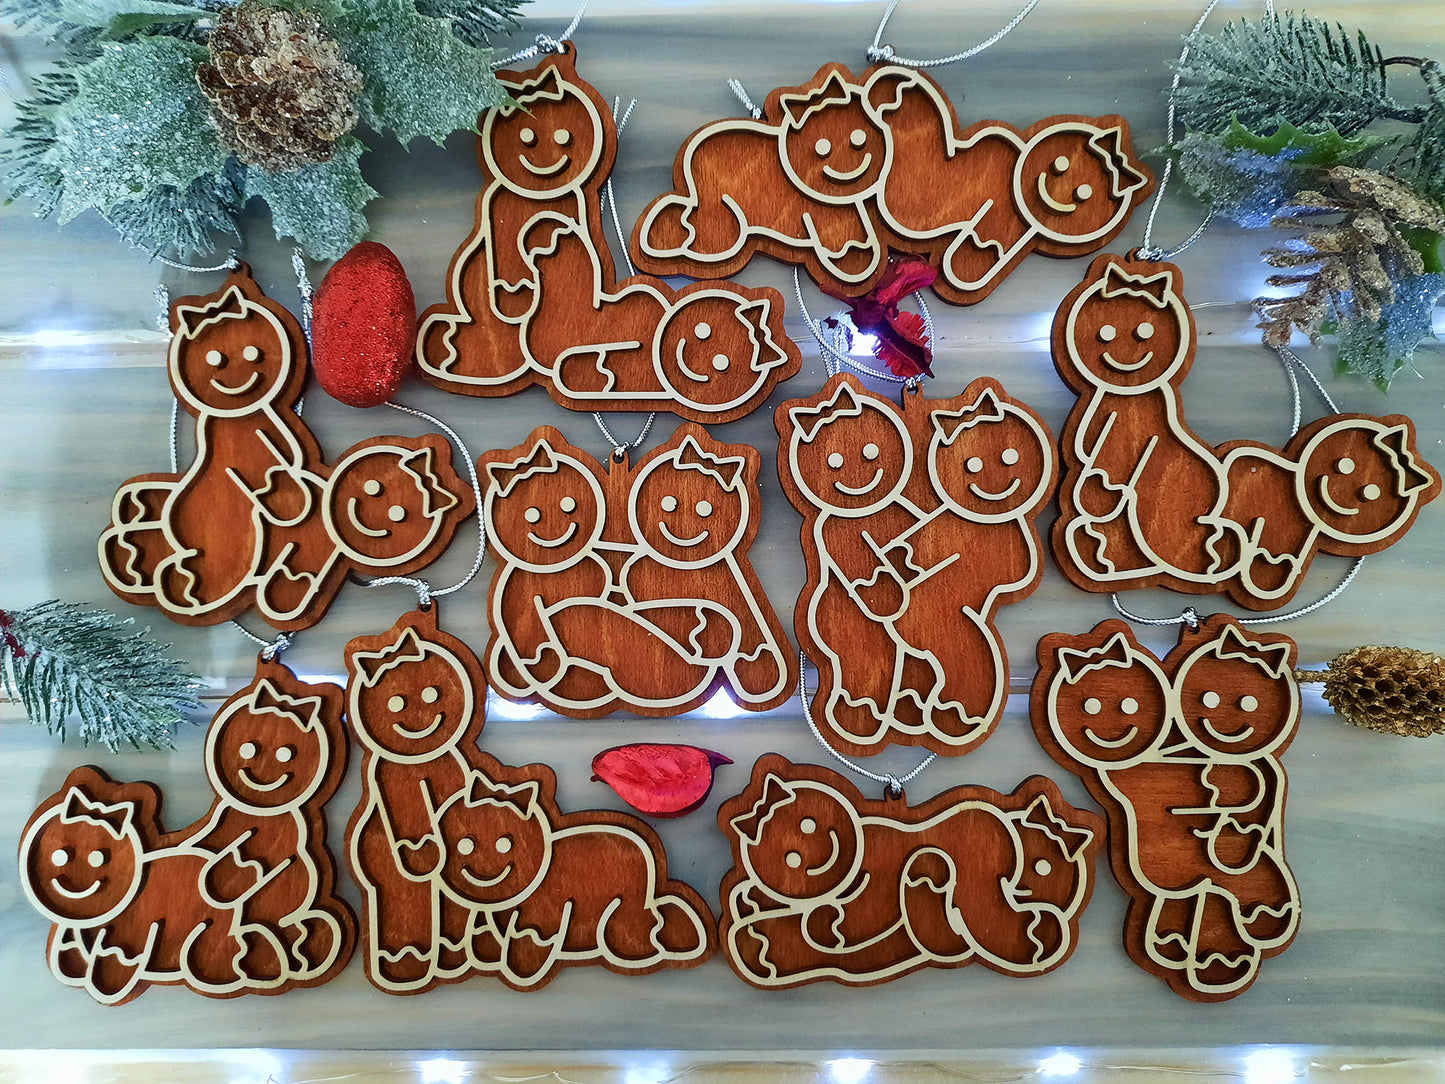 Pack of 10 Same Sex Gingerbreads  - Christmas Decoration verL - PG Factory